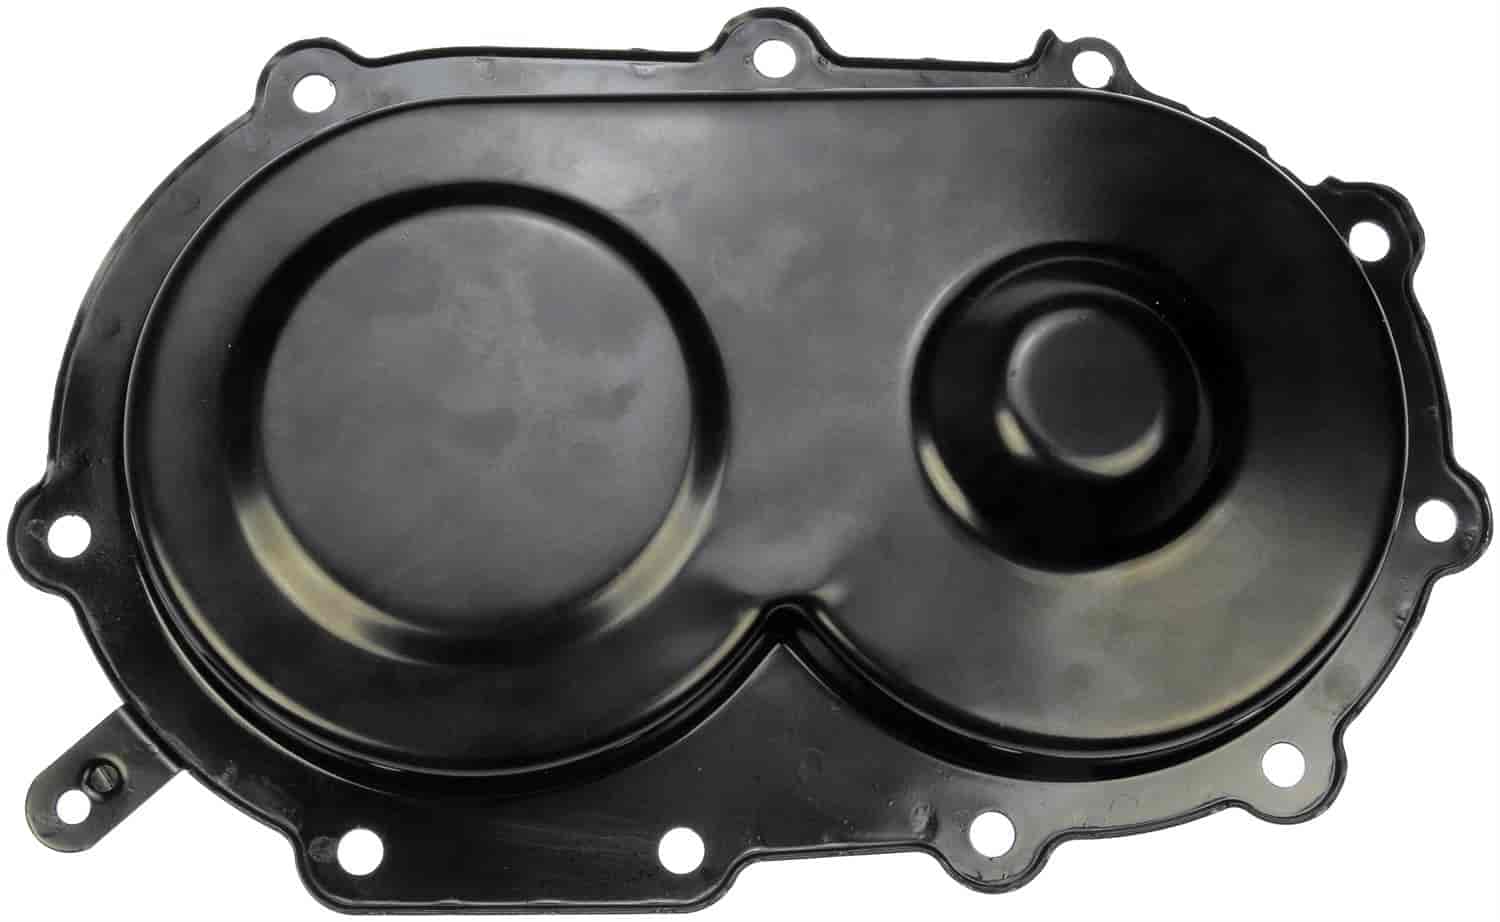 Transmission Pan Gasket and Hardware Not Included